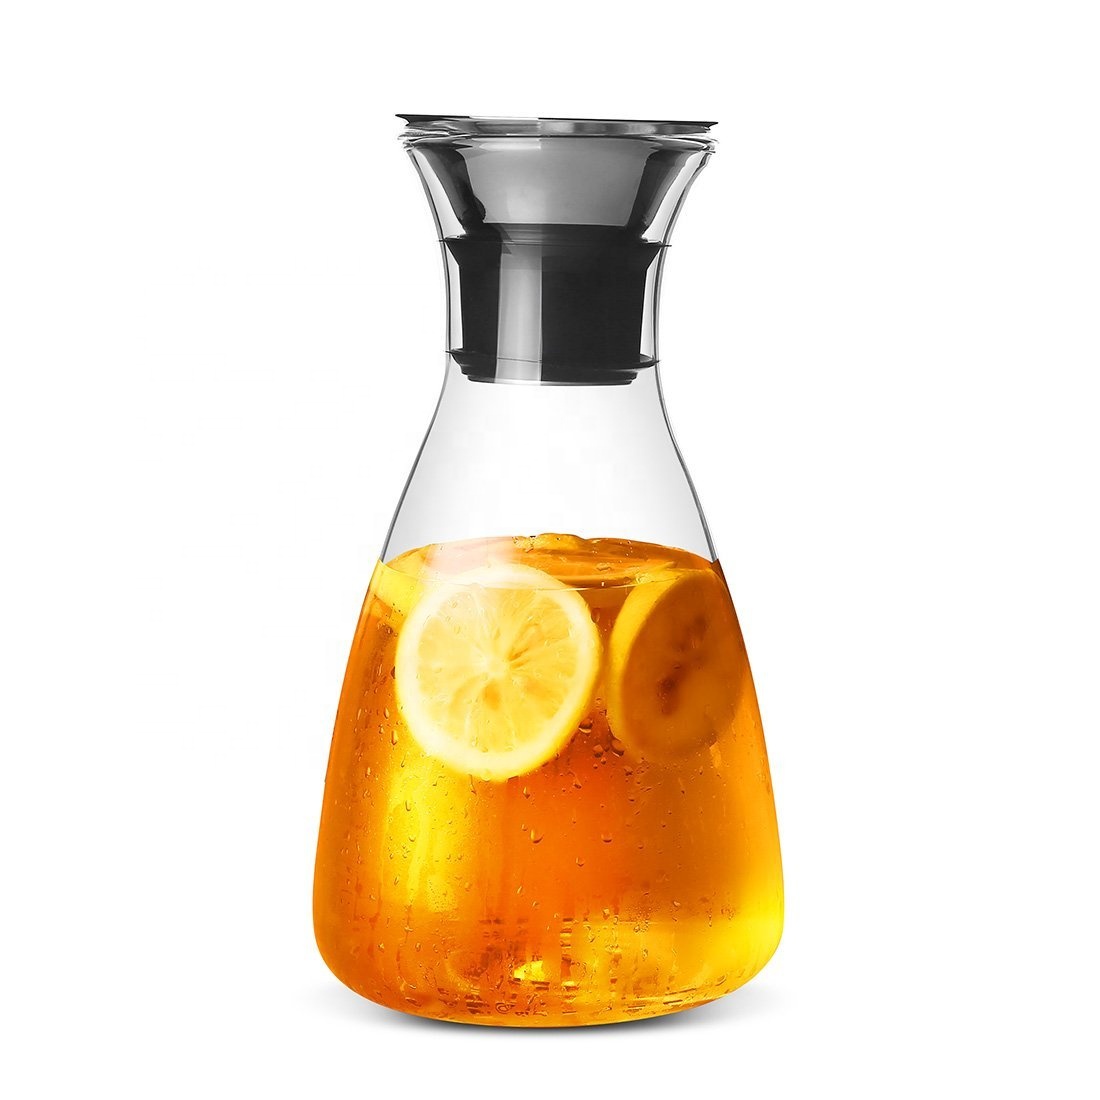 Morden Fashion Heat-resistant Glass Cooling Water Carafe with Stainless Steel Lid